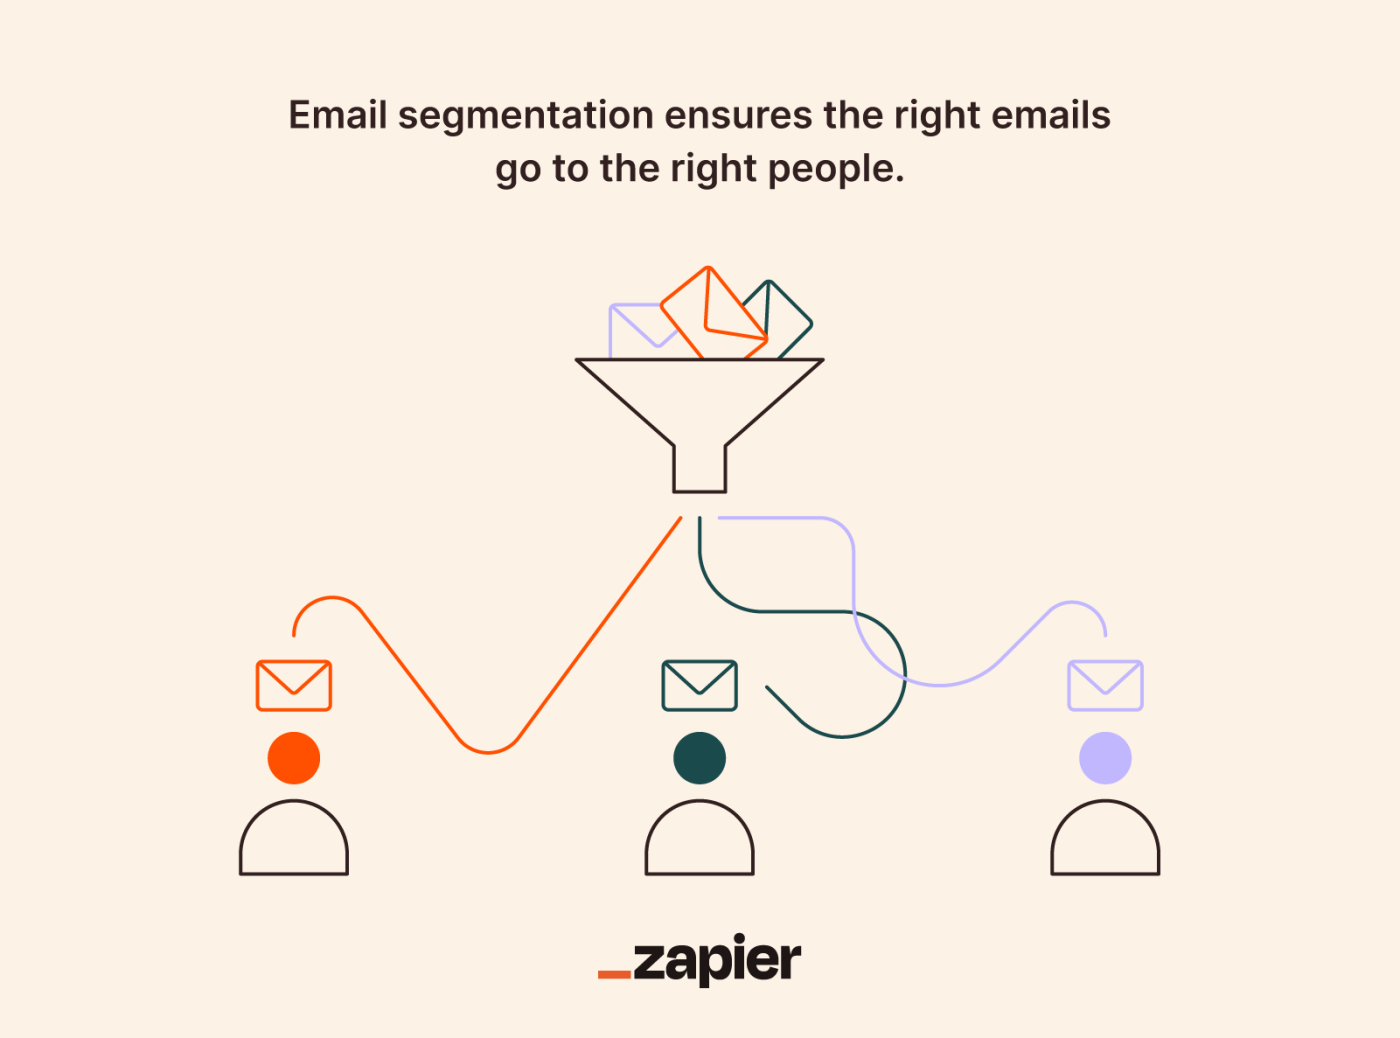 Illustrated workflow showing how email segmentation ensures the right emails go to the right people